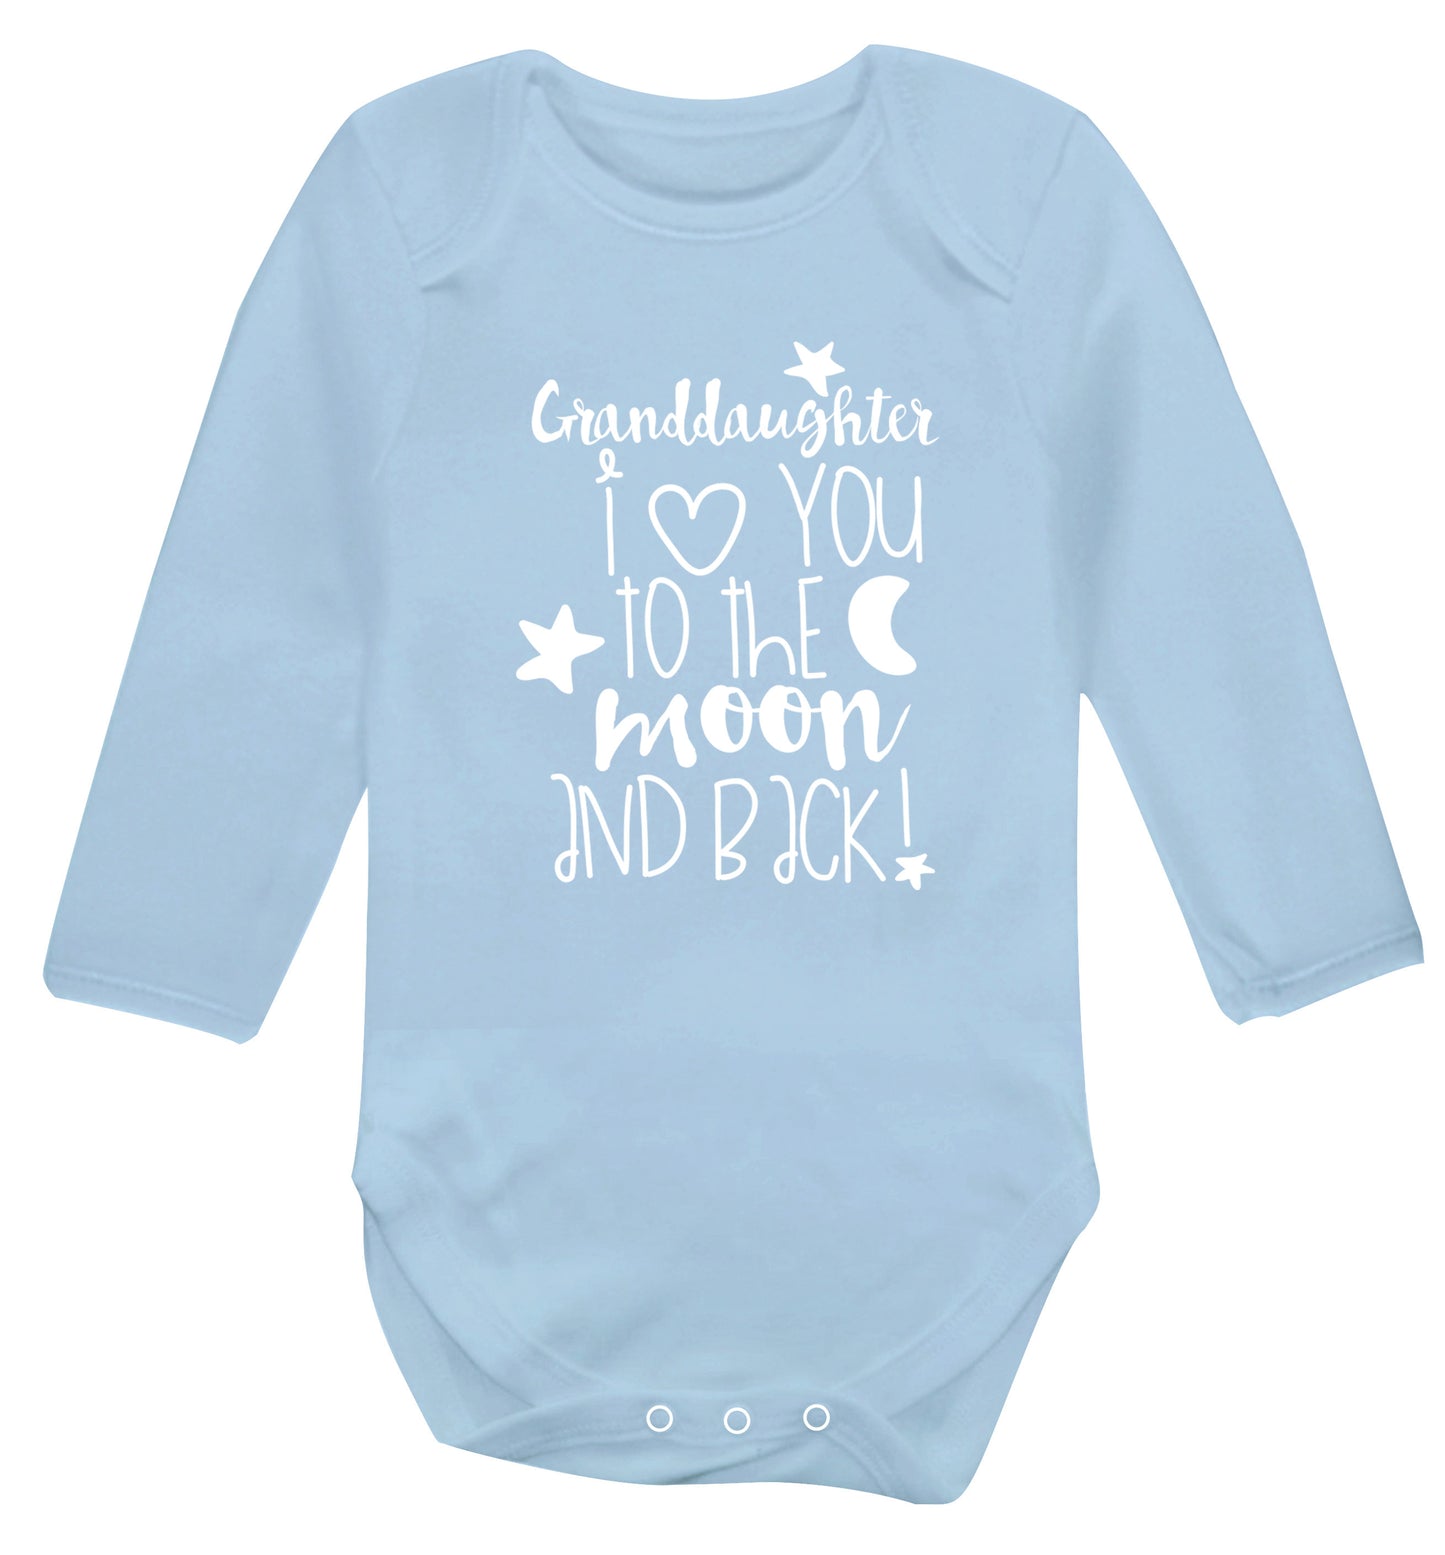 Granddaughter I love you to the moon and back Baby Vest long sleeved pale blue 6-12 months